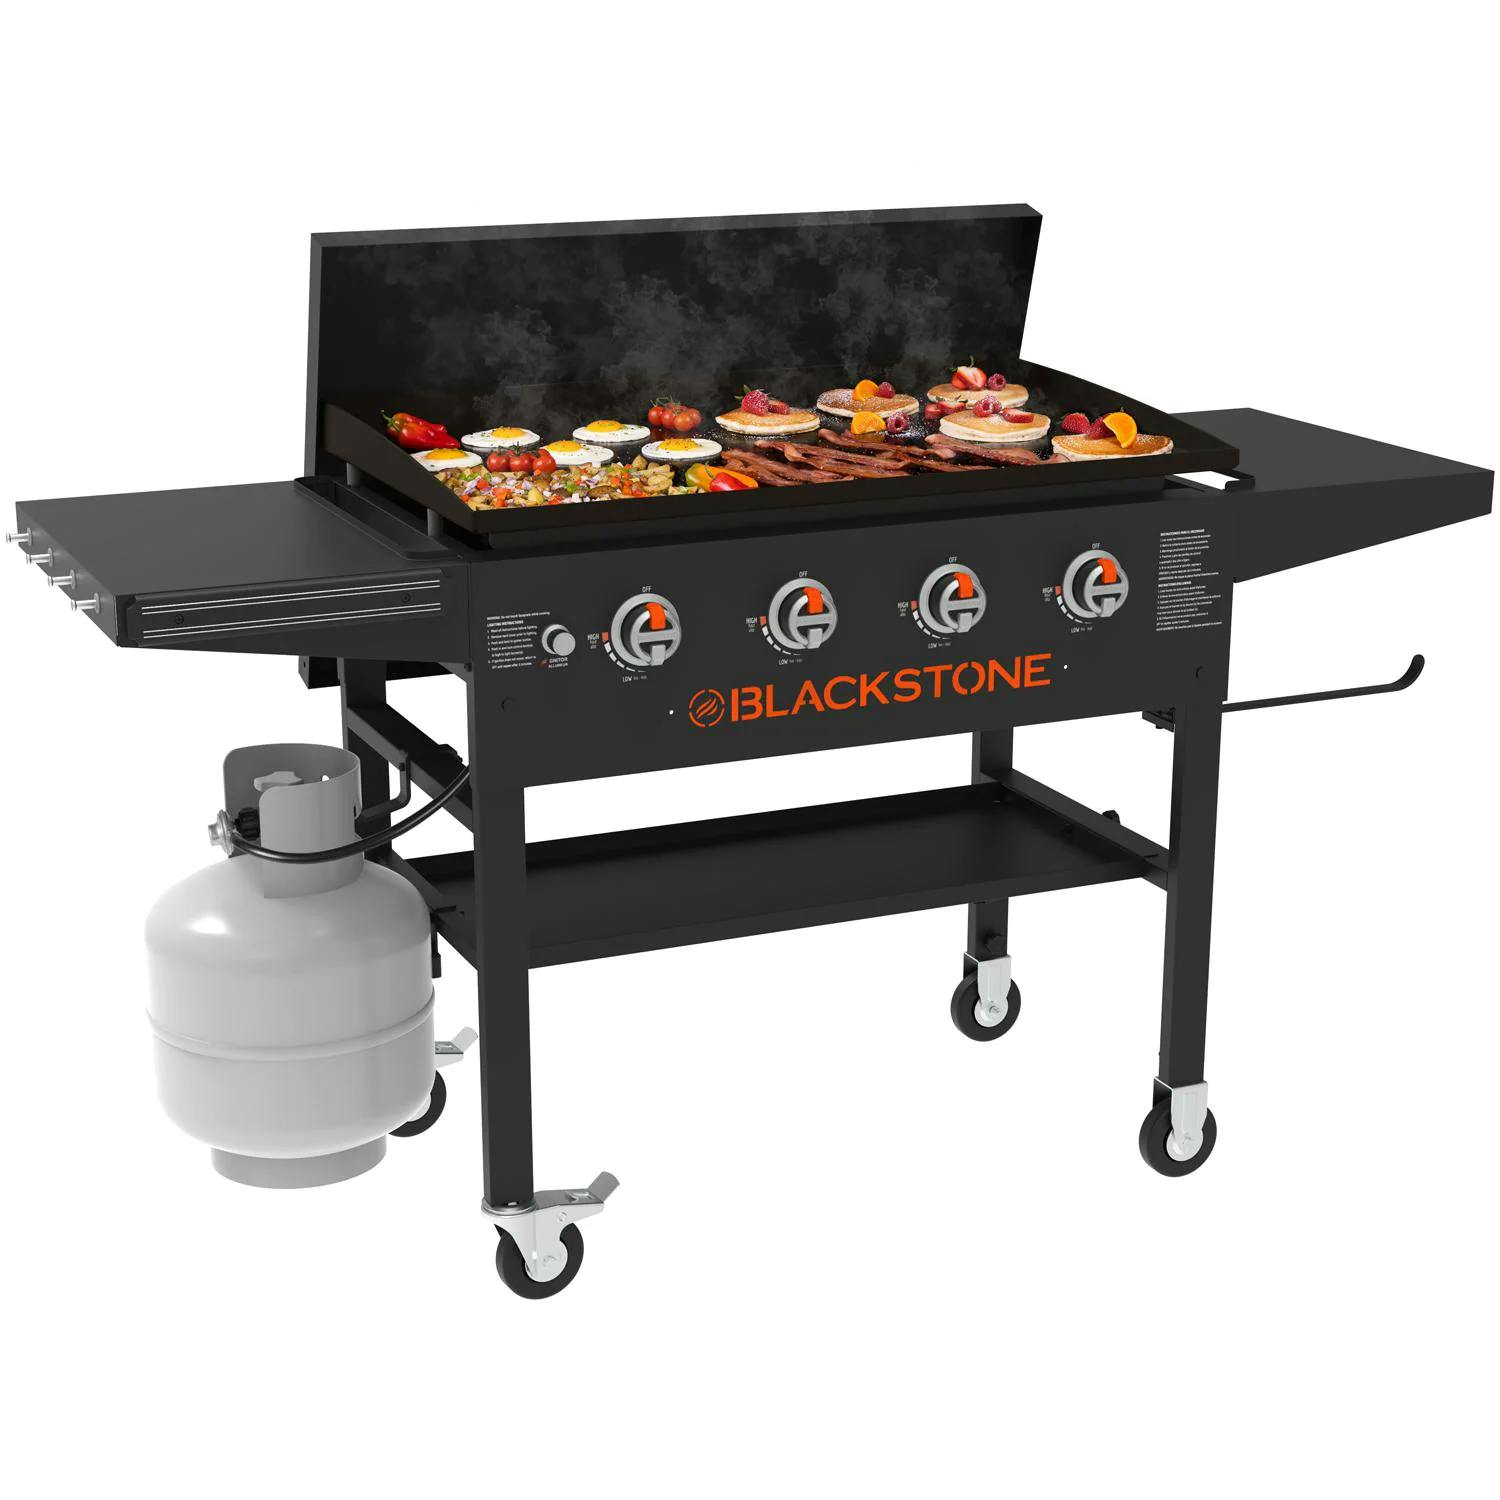 Blackstone Original Griddle Cooking Station with Hard Cover · 36 in. · Propane